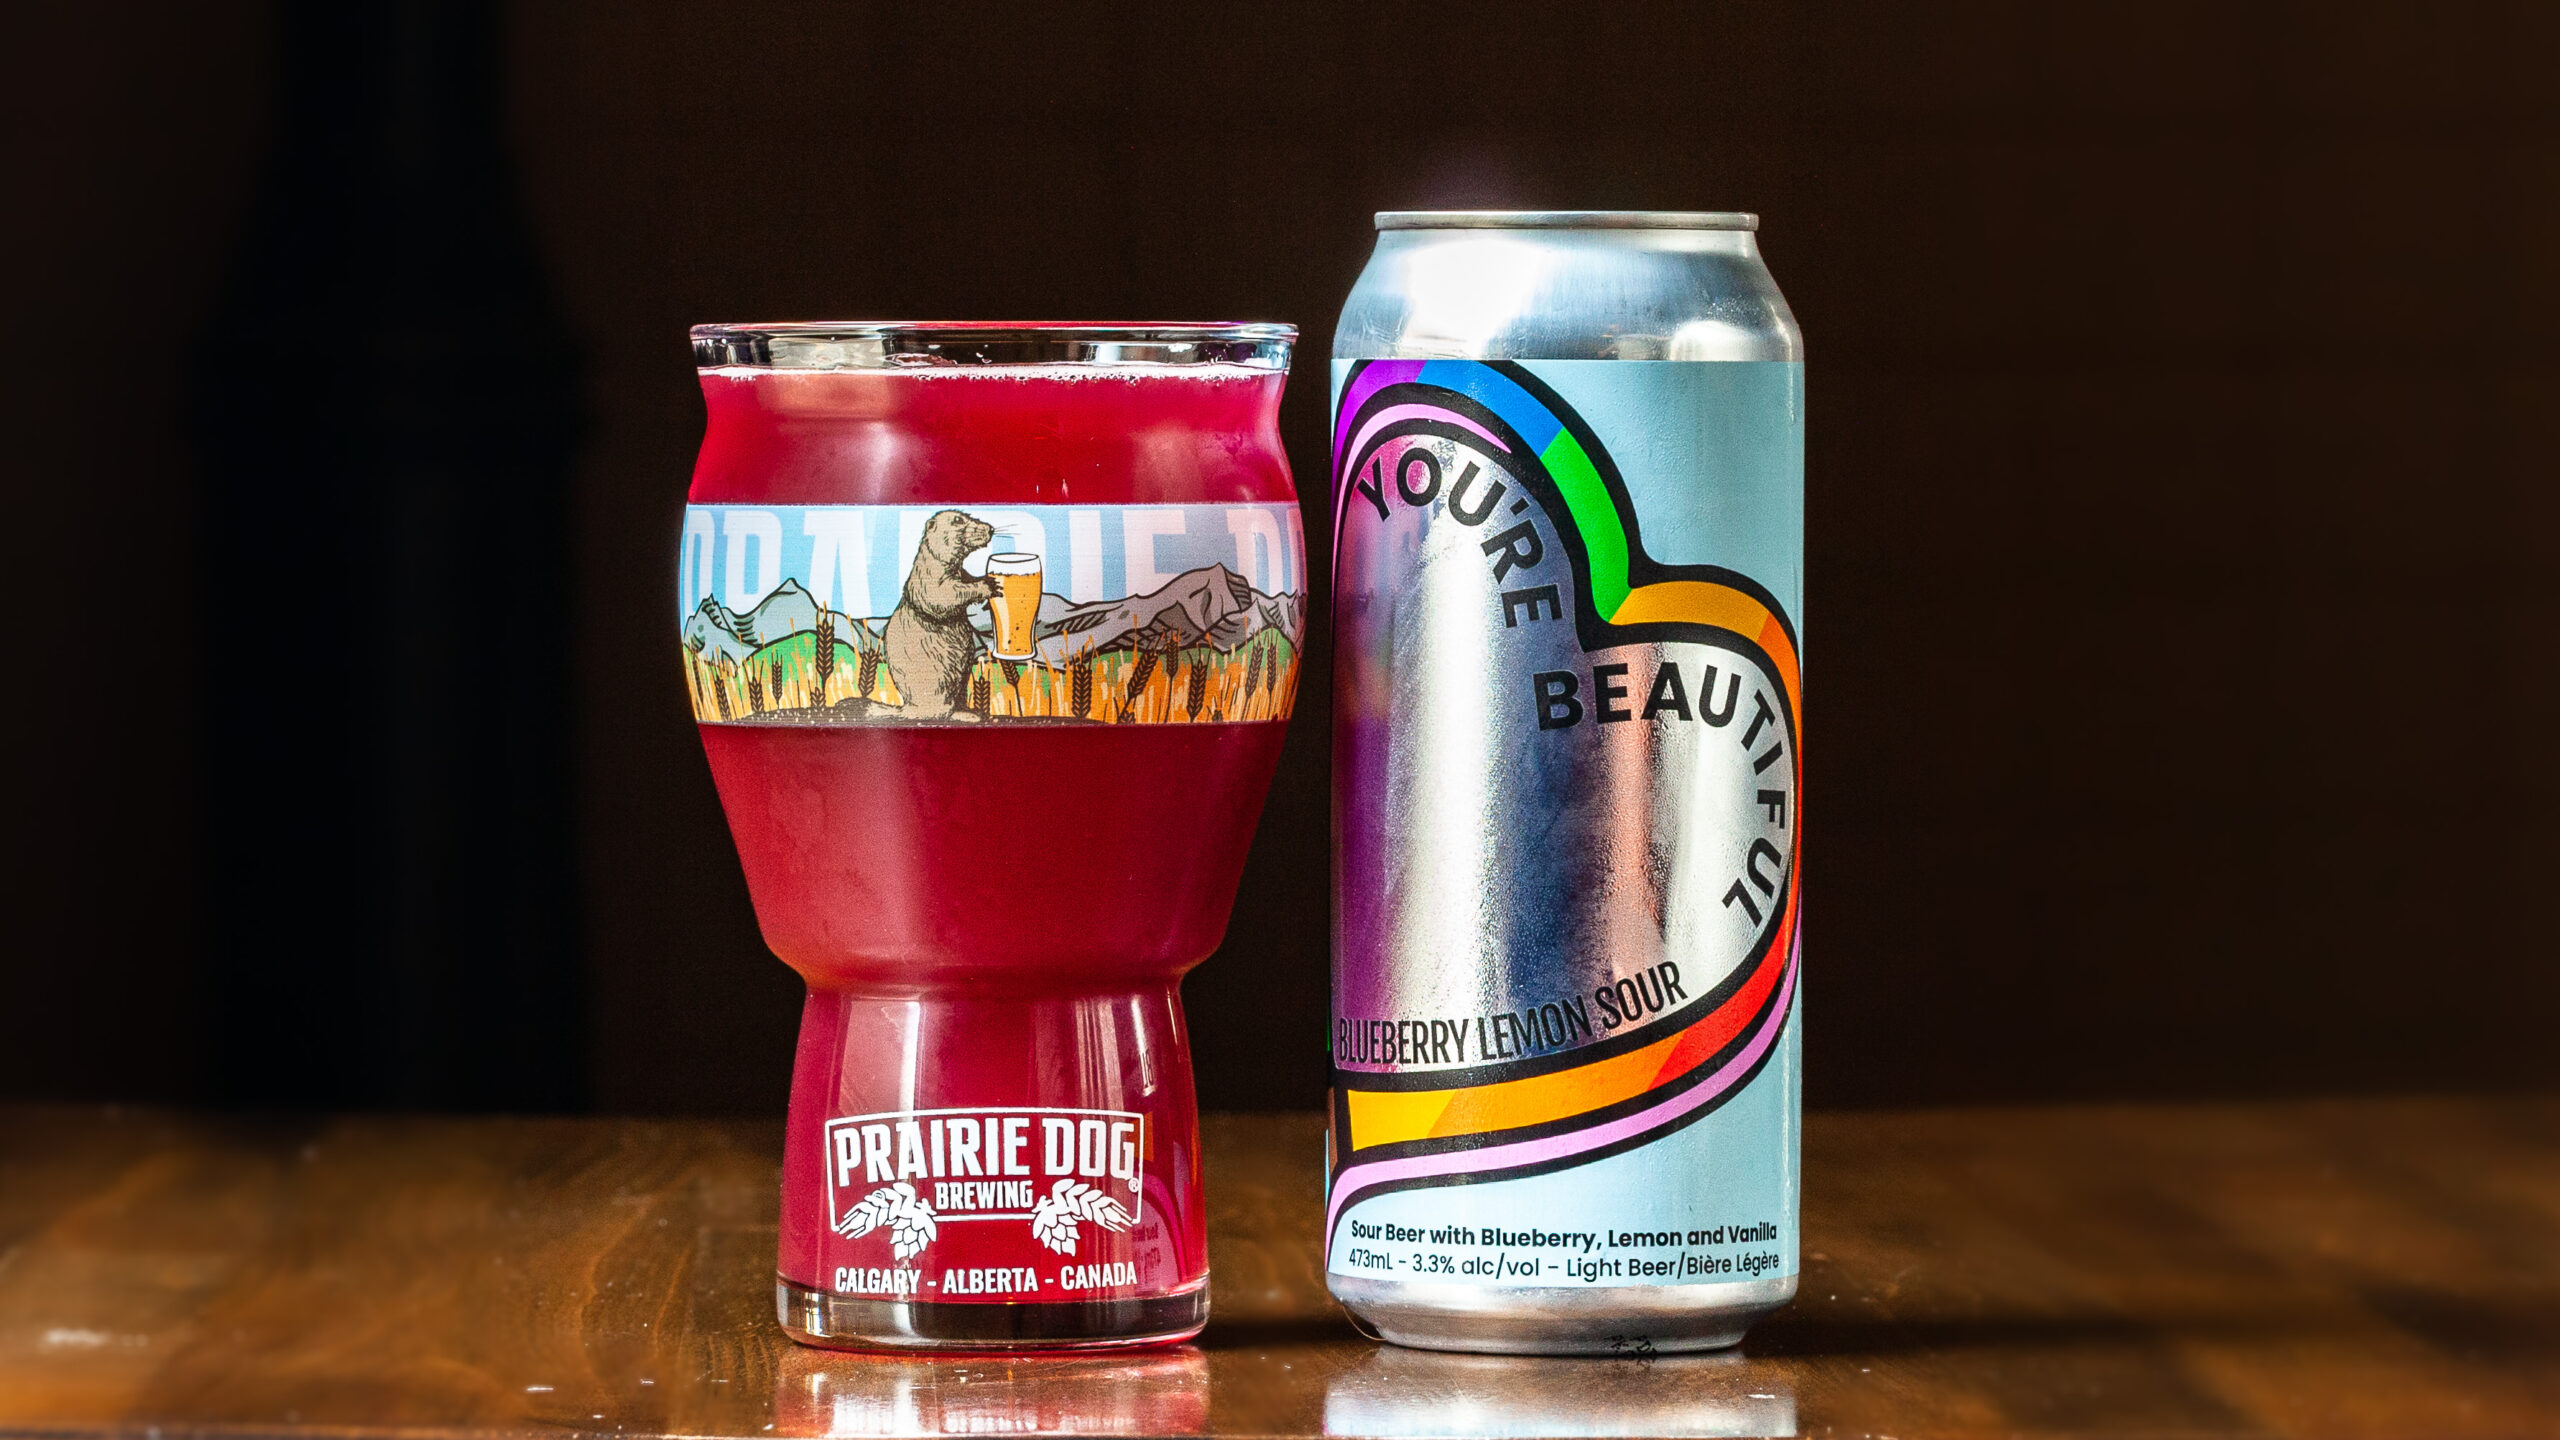 A 473-ml pint glass of brightly coloured beer next to a can of Prairie Dog Brewing You're Beautiful Blueberry Lemon Sour Beer in full colour wrapped label.